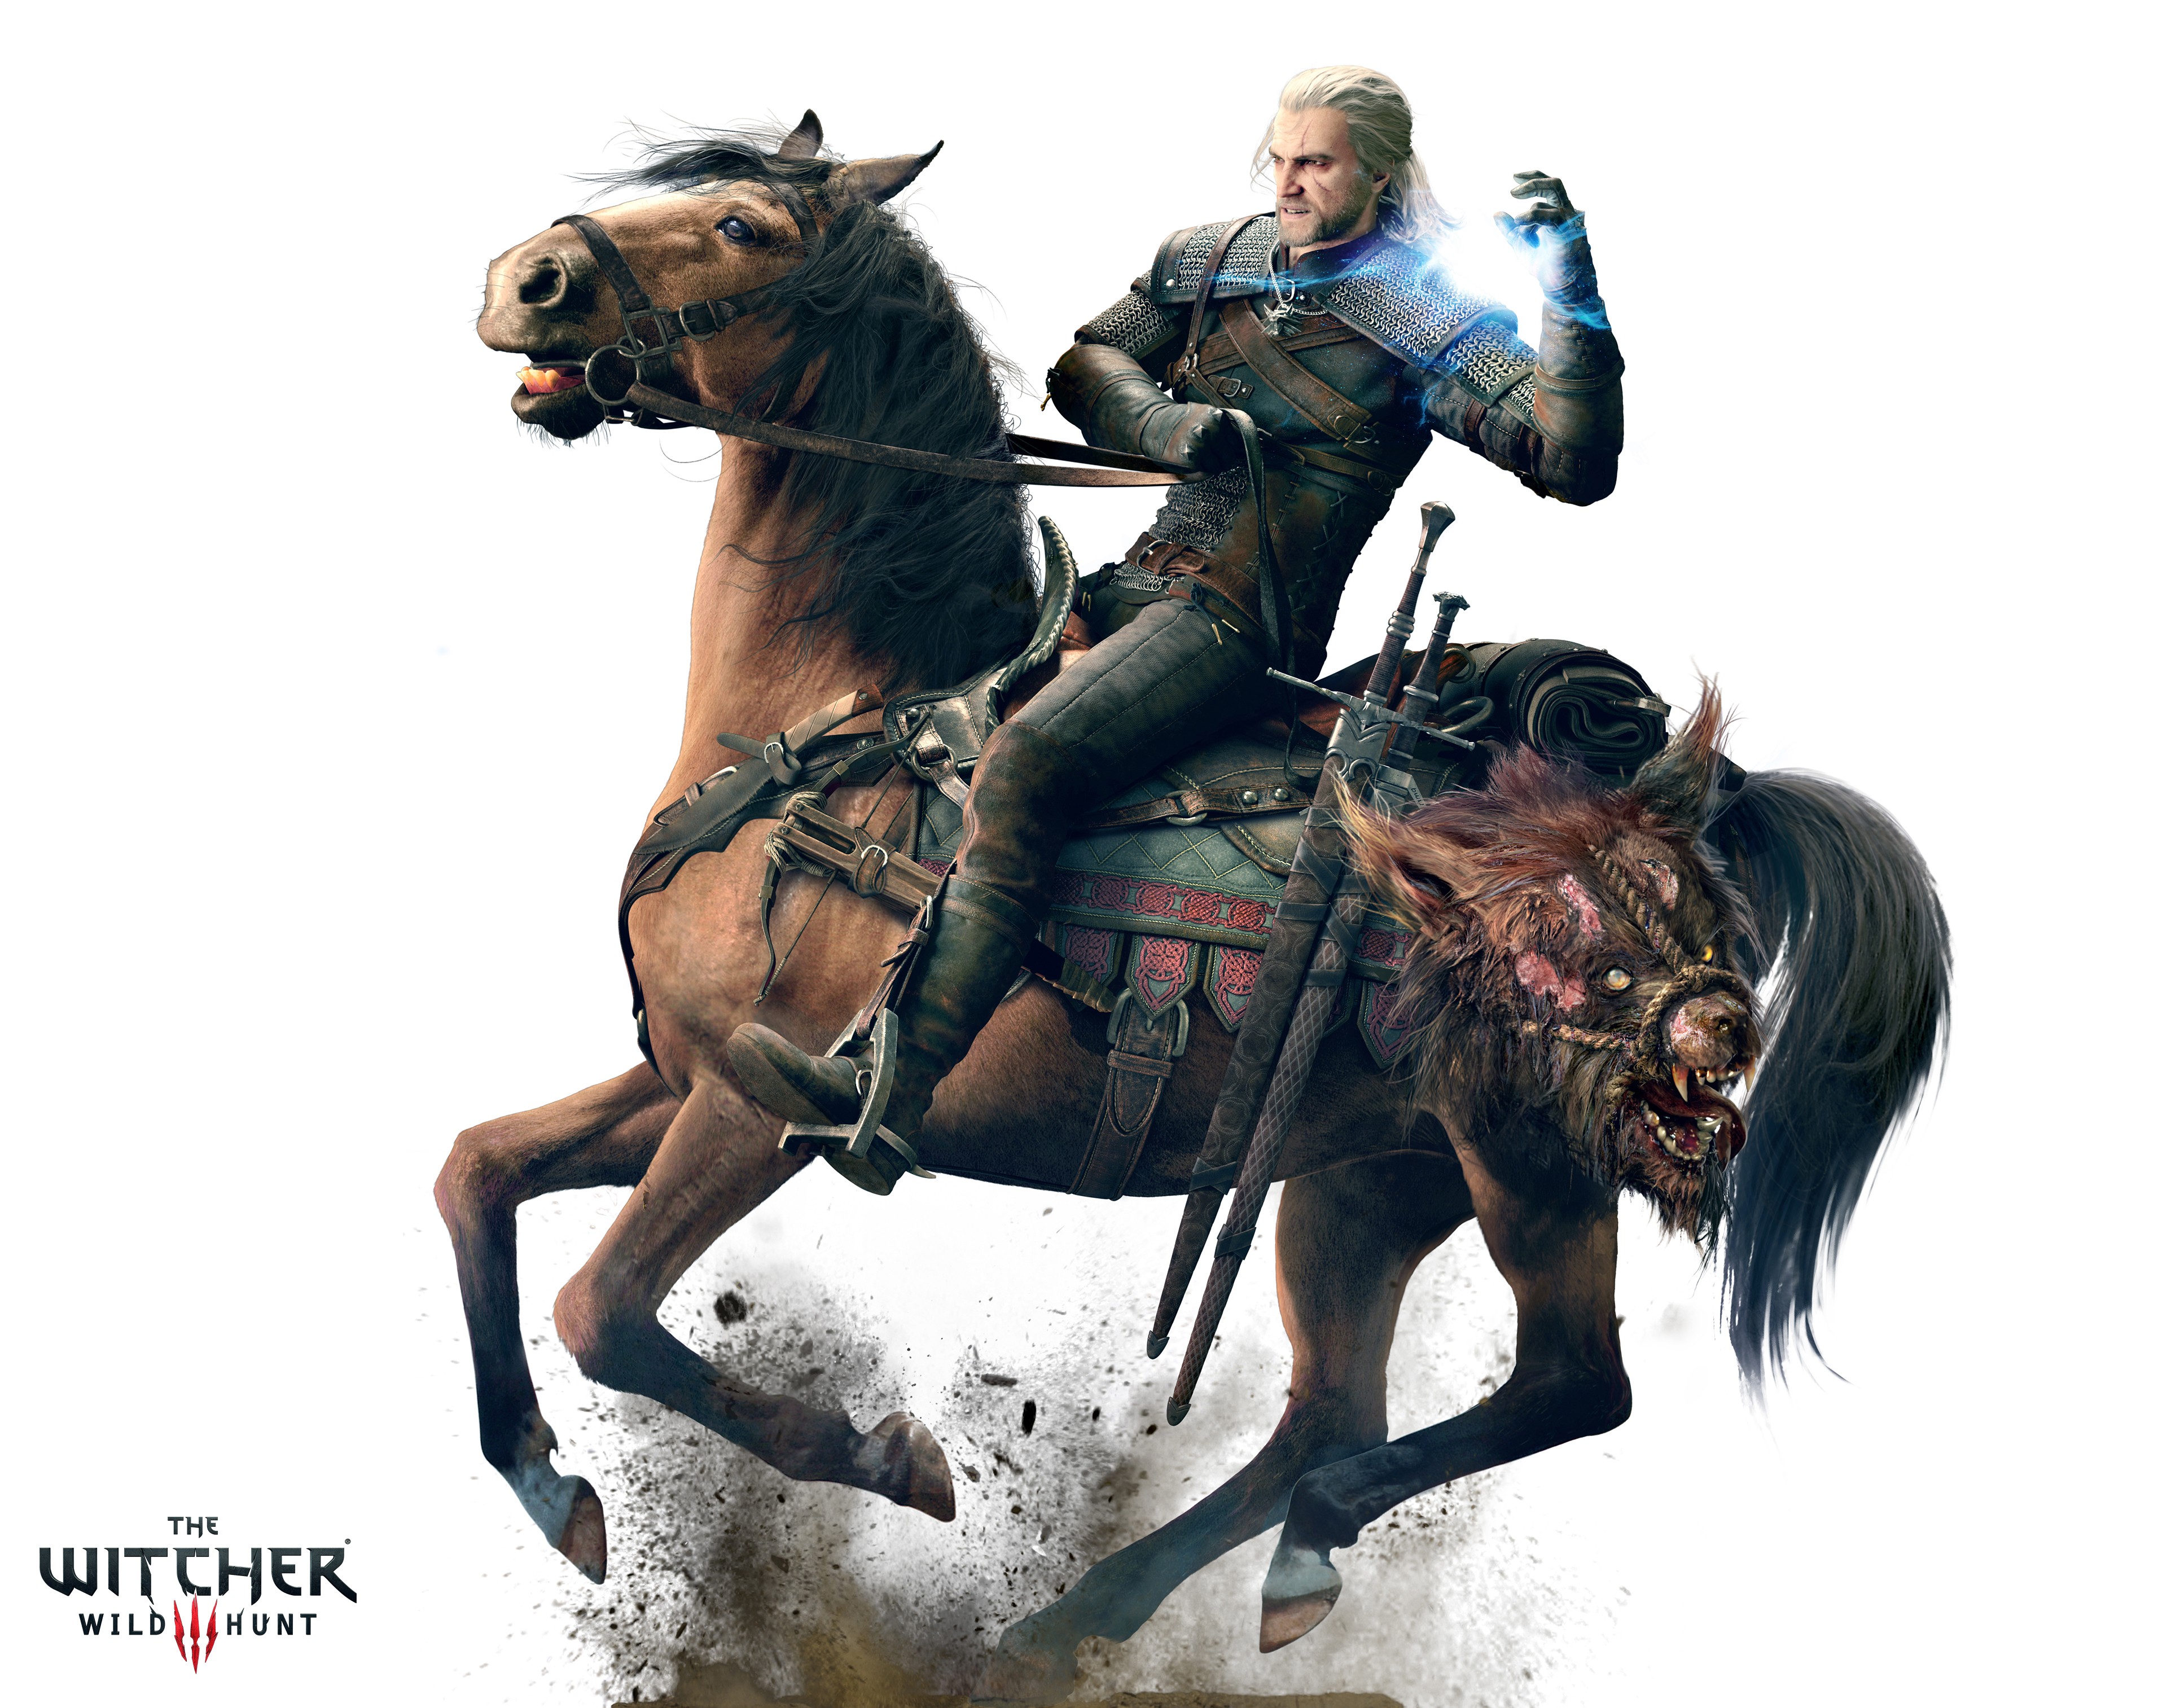 General 3840x3027 The Witcher 3: Wild Hunt Geralt of Rivia DLC video games Płotka (horse) PC gaming video game men fantasy men video game characters CD Projekt RED white background horse animals mammals